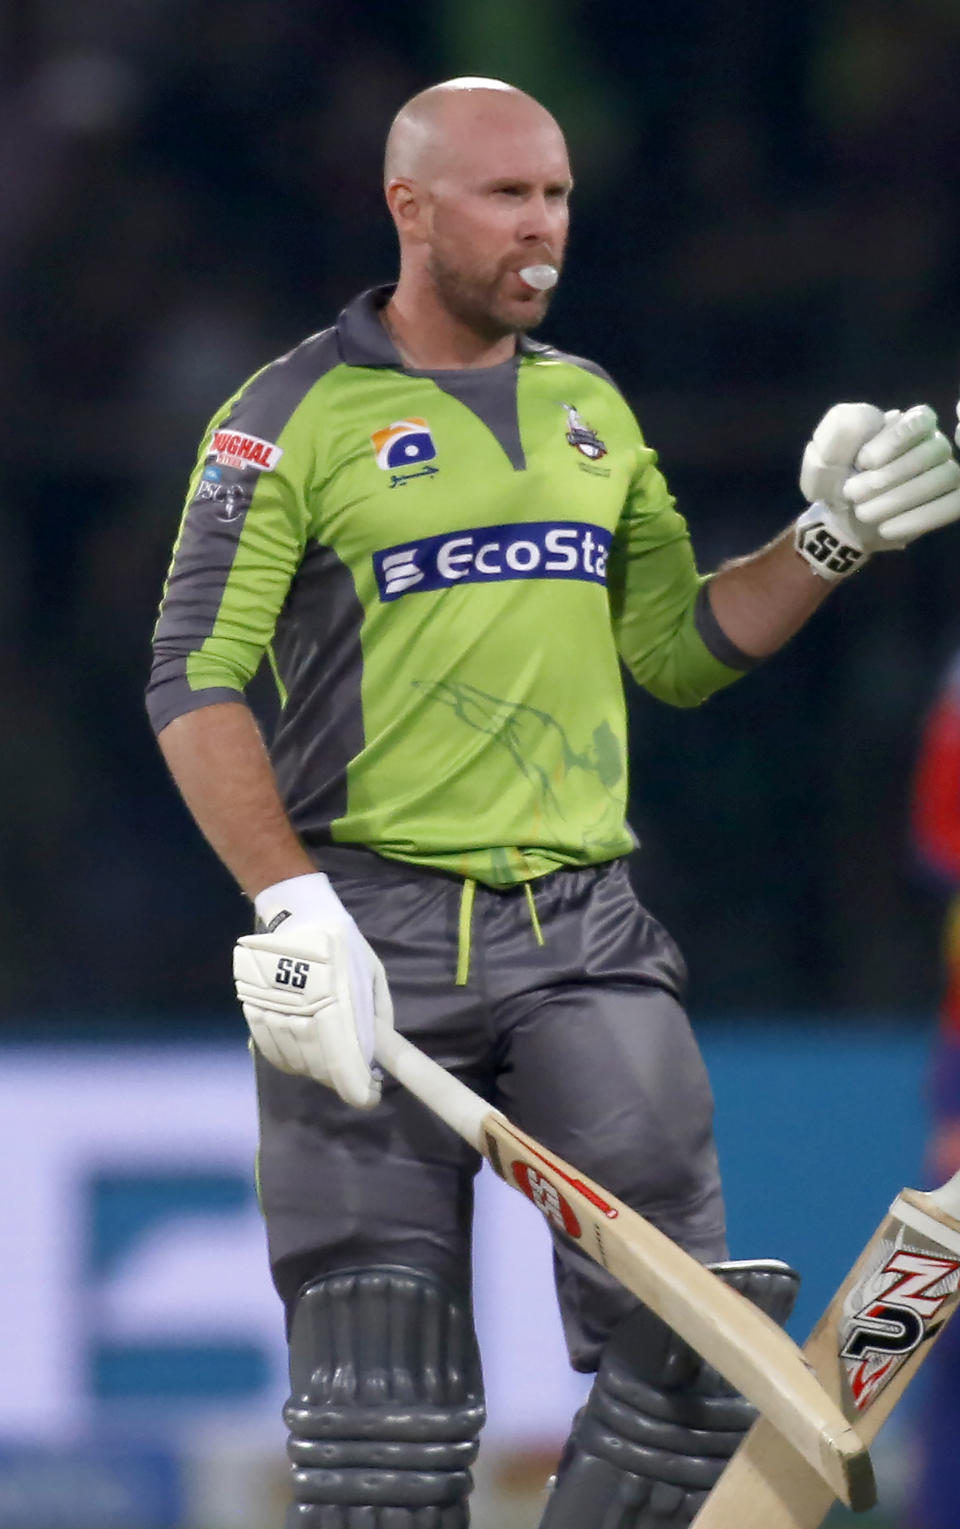 In this Sunday, March 8, 2020 photo, Lahore Qalandars batsmen Ben Dunk walks during a Pakistan Super League T20 cricket match against Karachi Kings, in Lahore, Pakistan. A bubble chewing bald Australian batsman has suddenly become an instant hit in the Pakistan Super League Twenty20 tournament. Dunk broke his own record of most sixes in a PSL game within a week when he smashed 12 towering sixes against Karachi Kings in a blistering knock of unbeaten 99 off just 40 balls on Sunday night. (AP Photo/K.M. Chaudary)